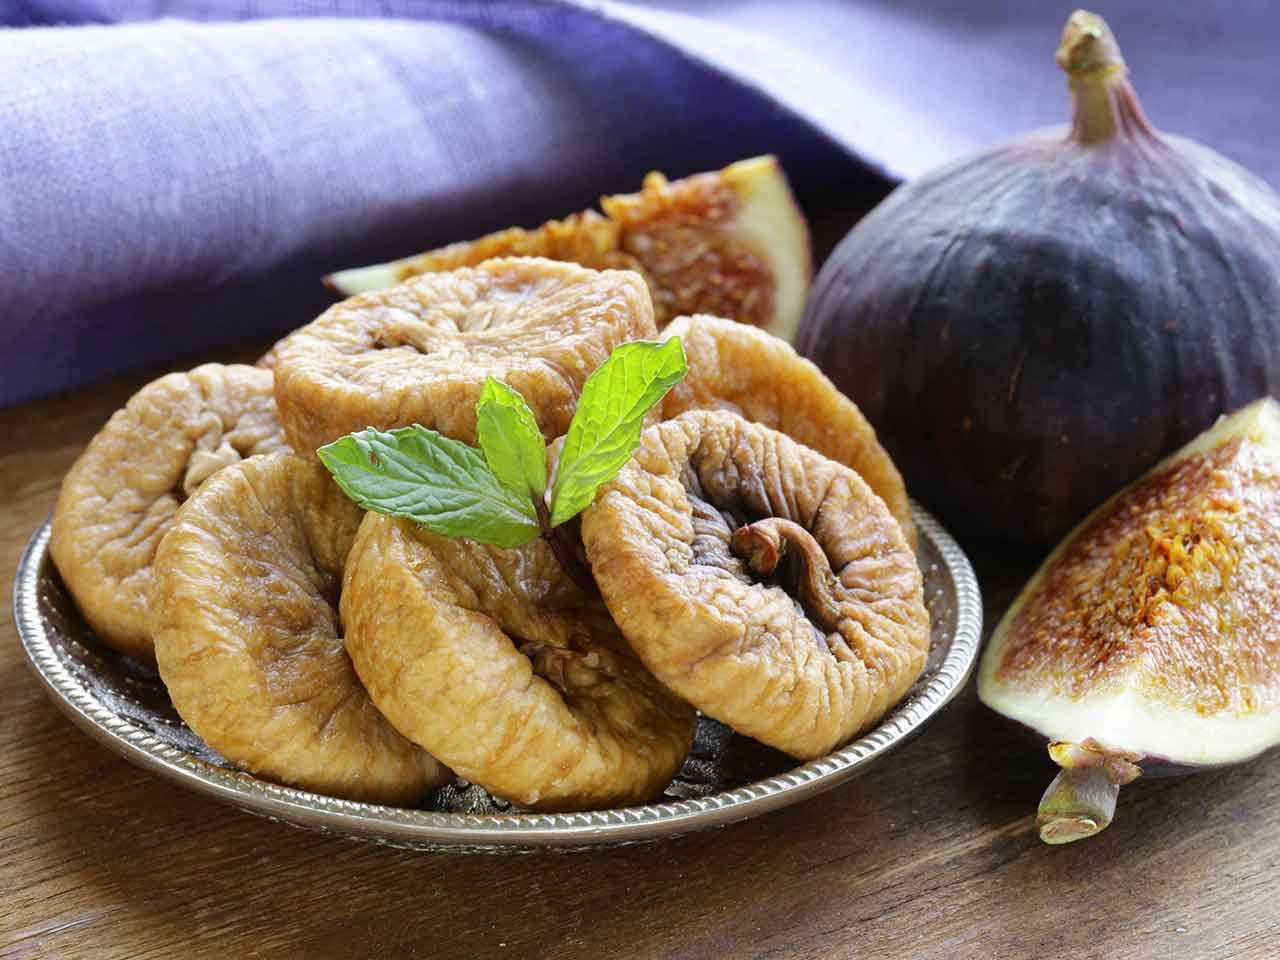 A plate of dried figs and a fresh fig